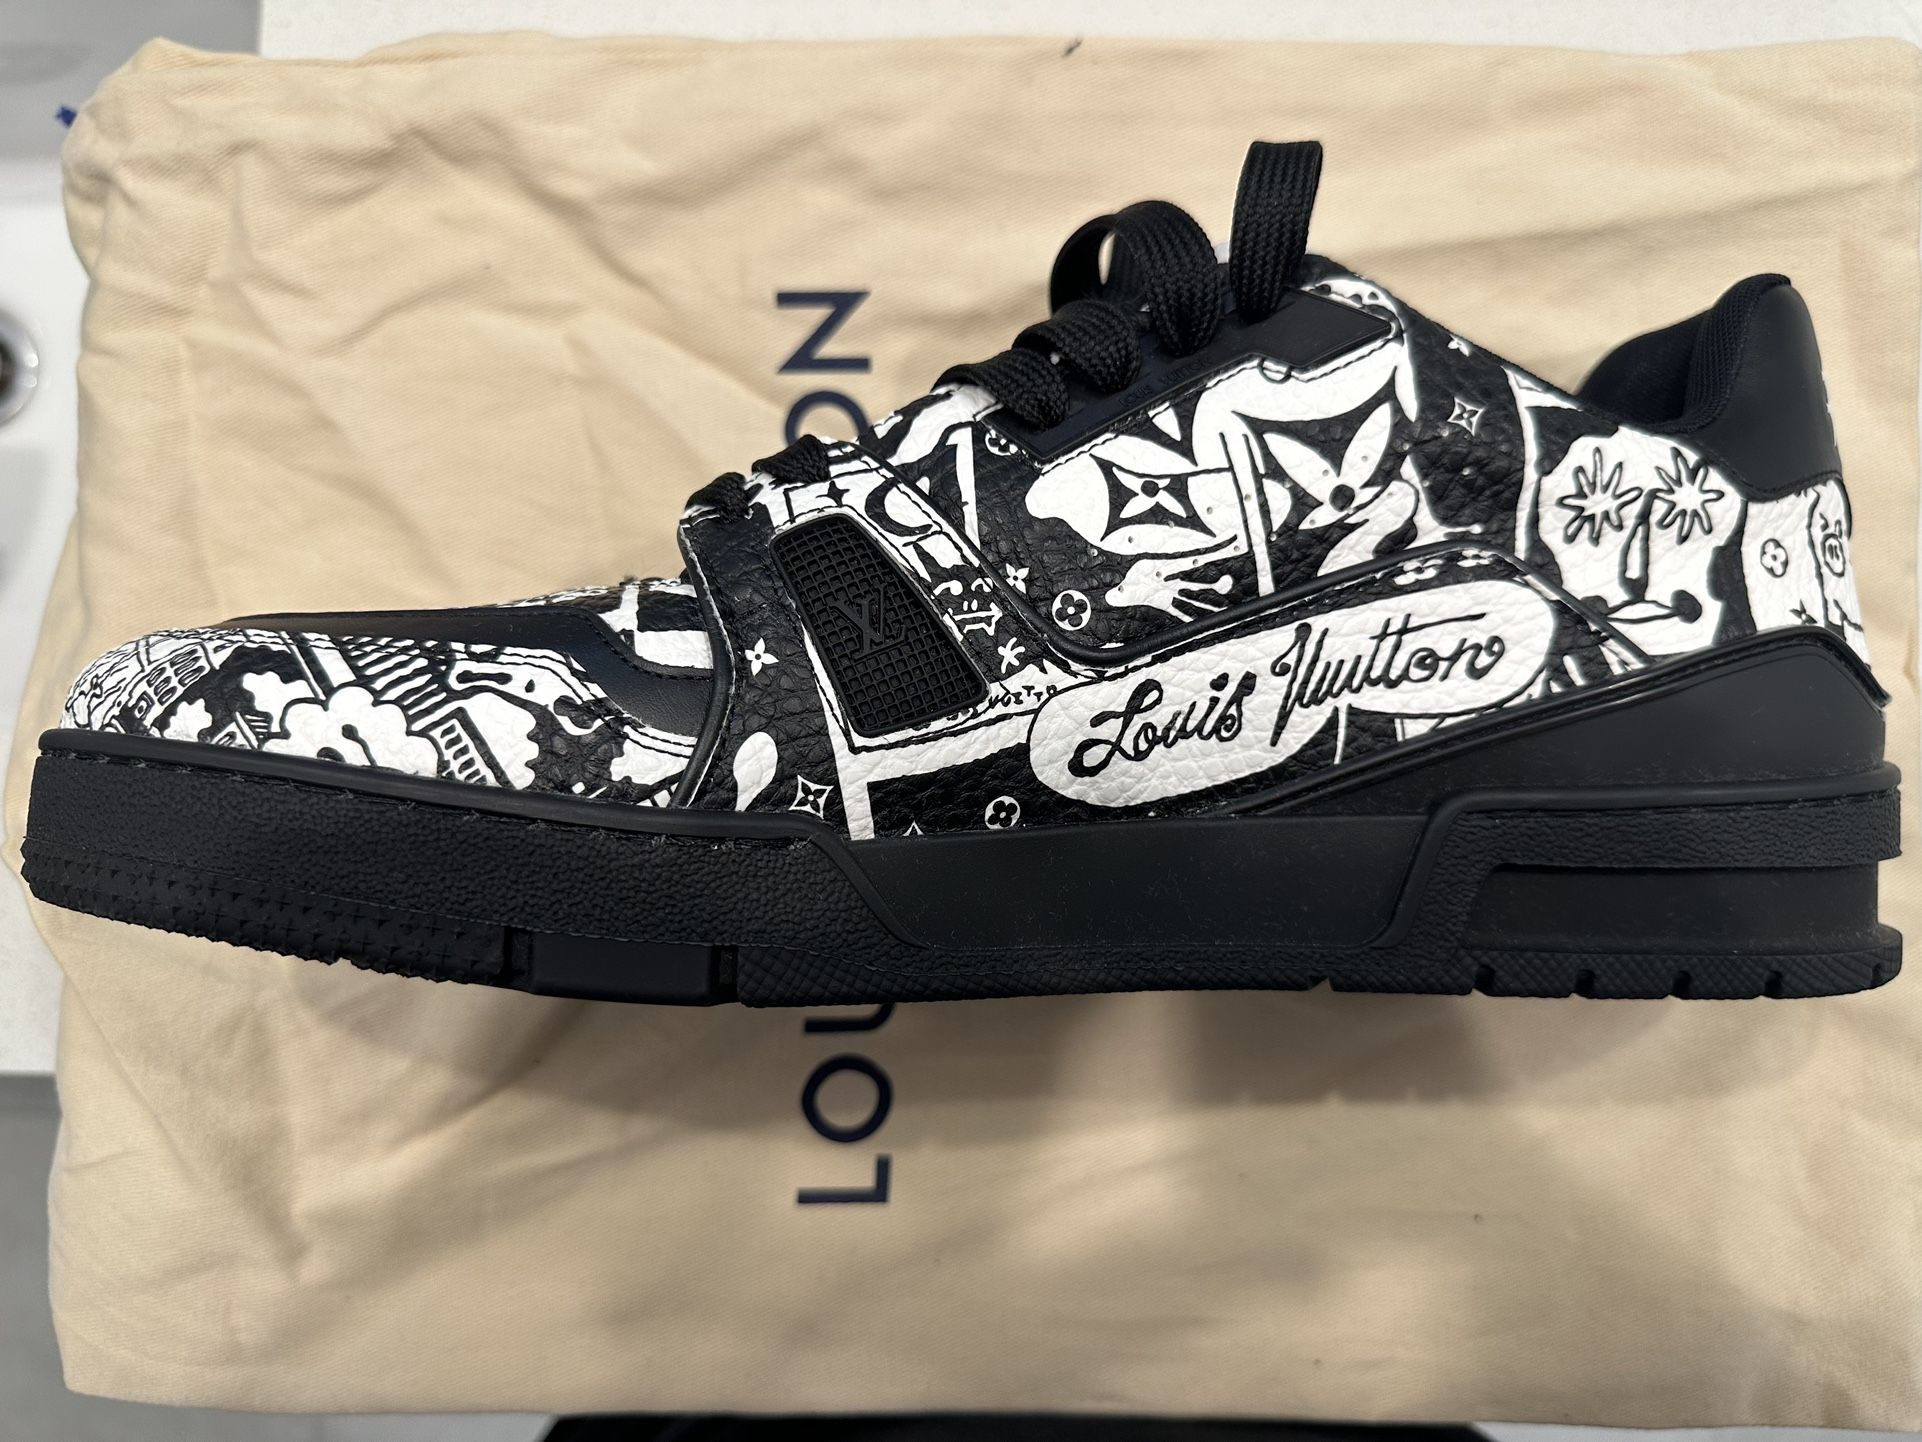 Louis Vuitton Monogram Trainer Sneakers 'Black/White' for Sale in Round  Rock, TX - OfferUp